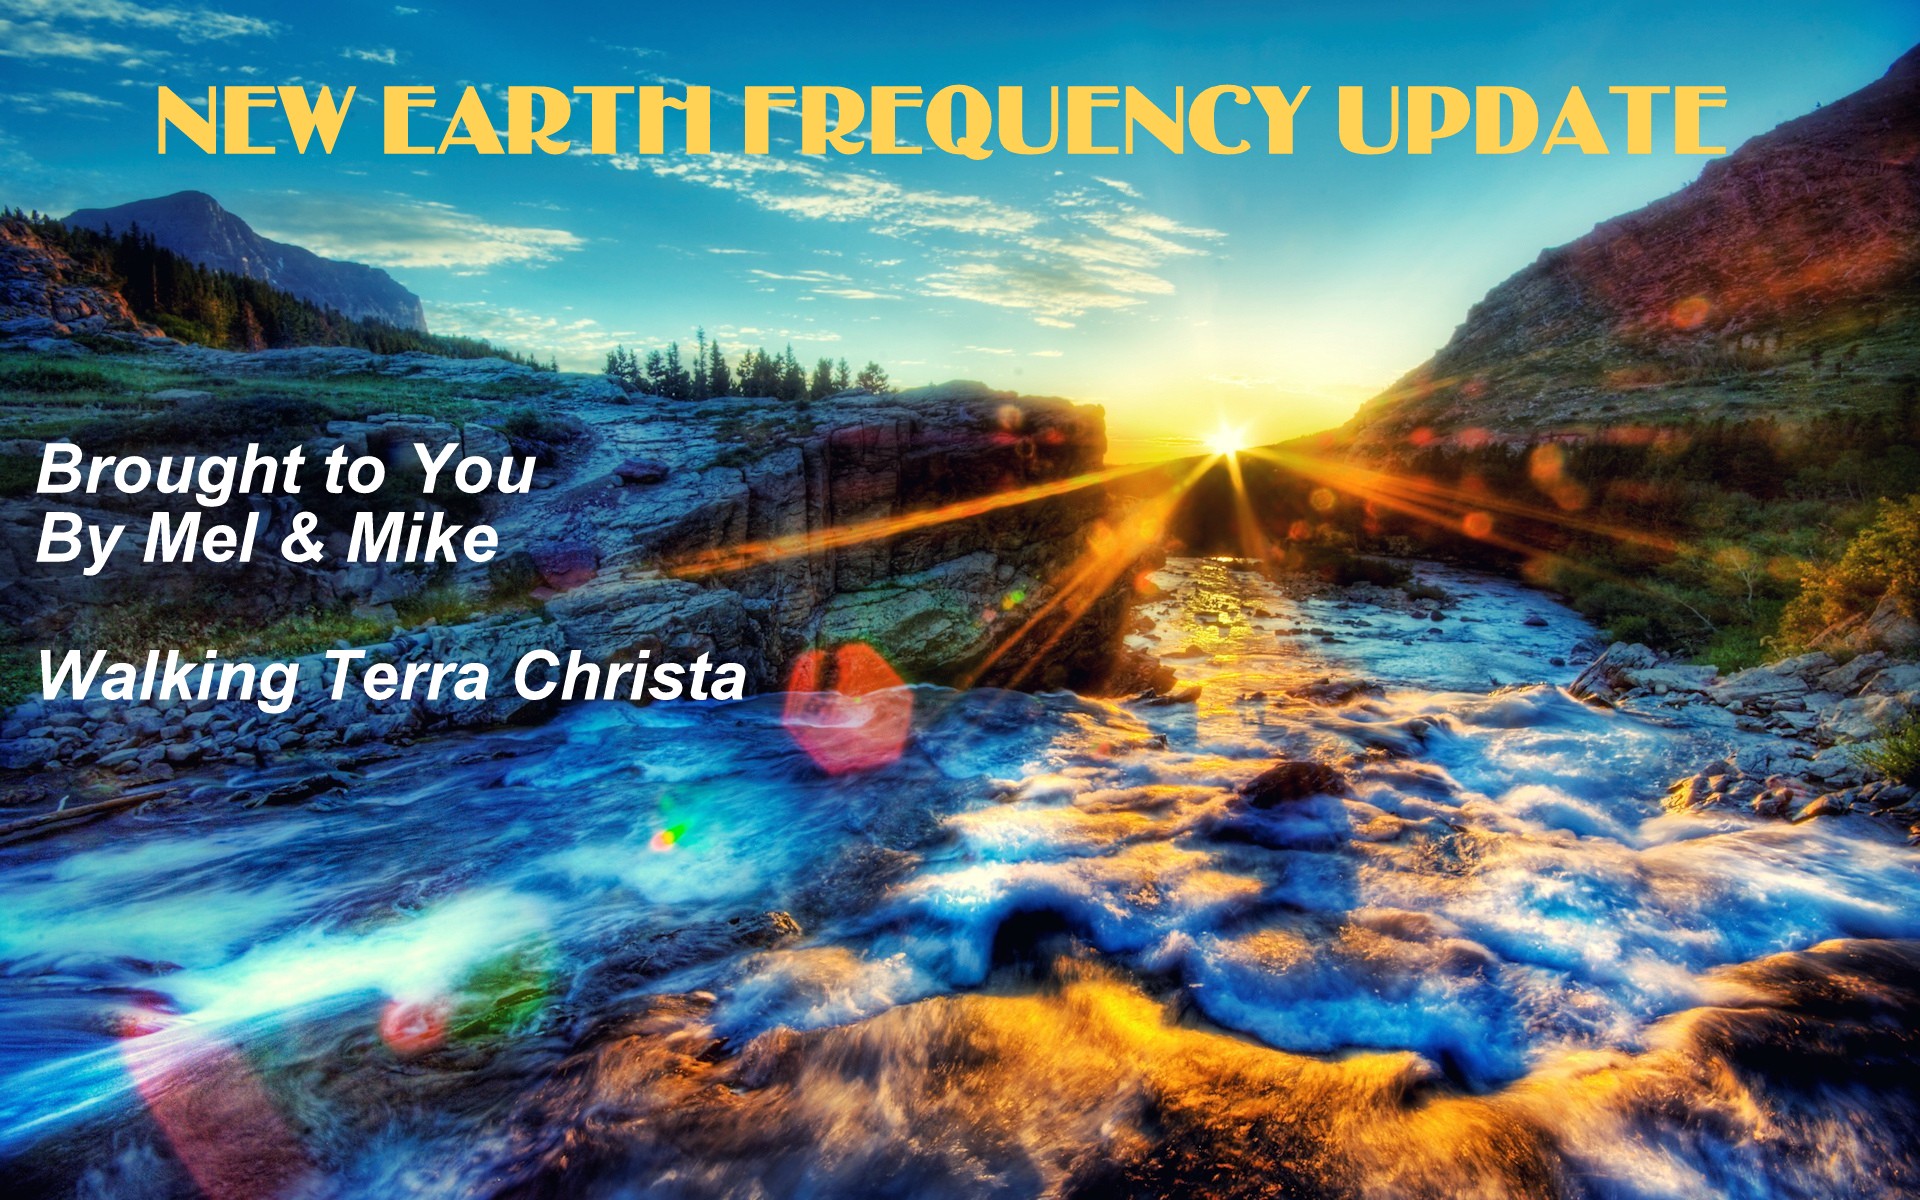 New-Earth-Frequency-Update.jpg